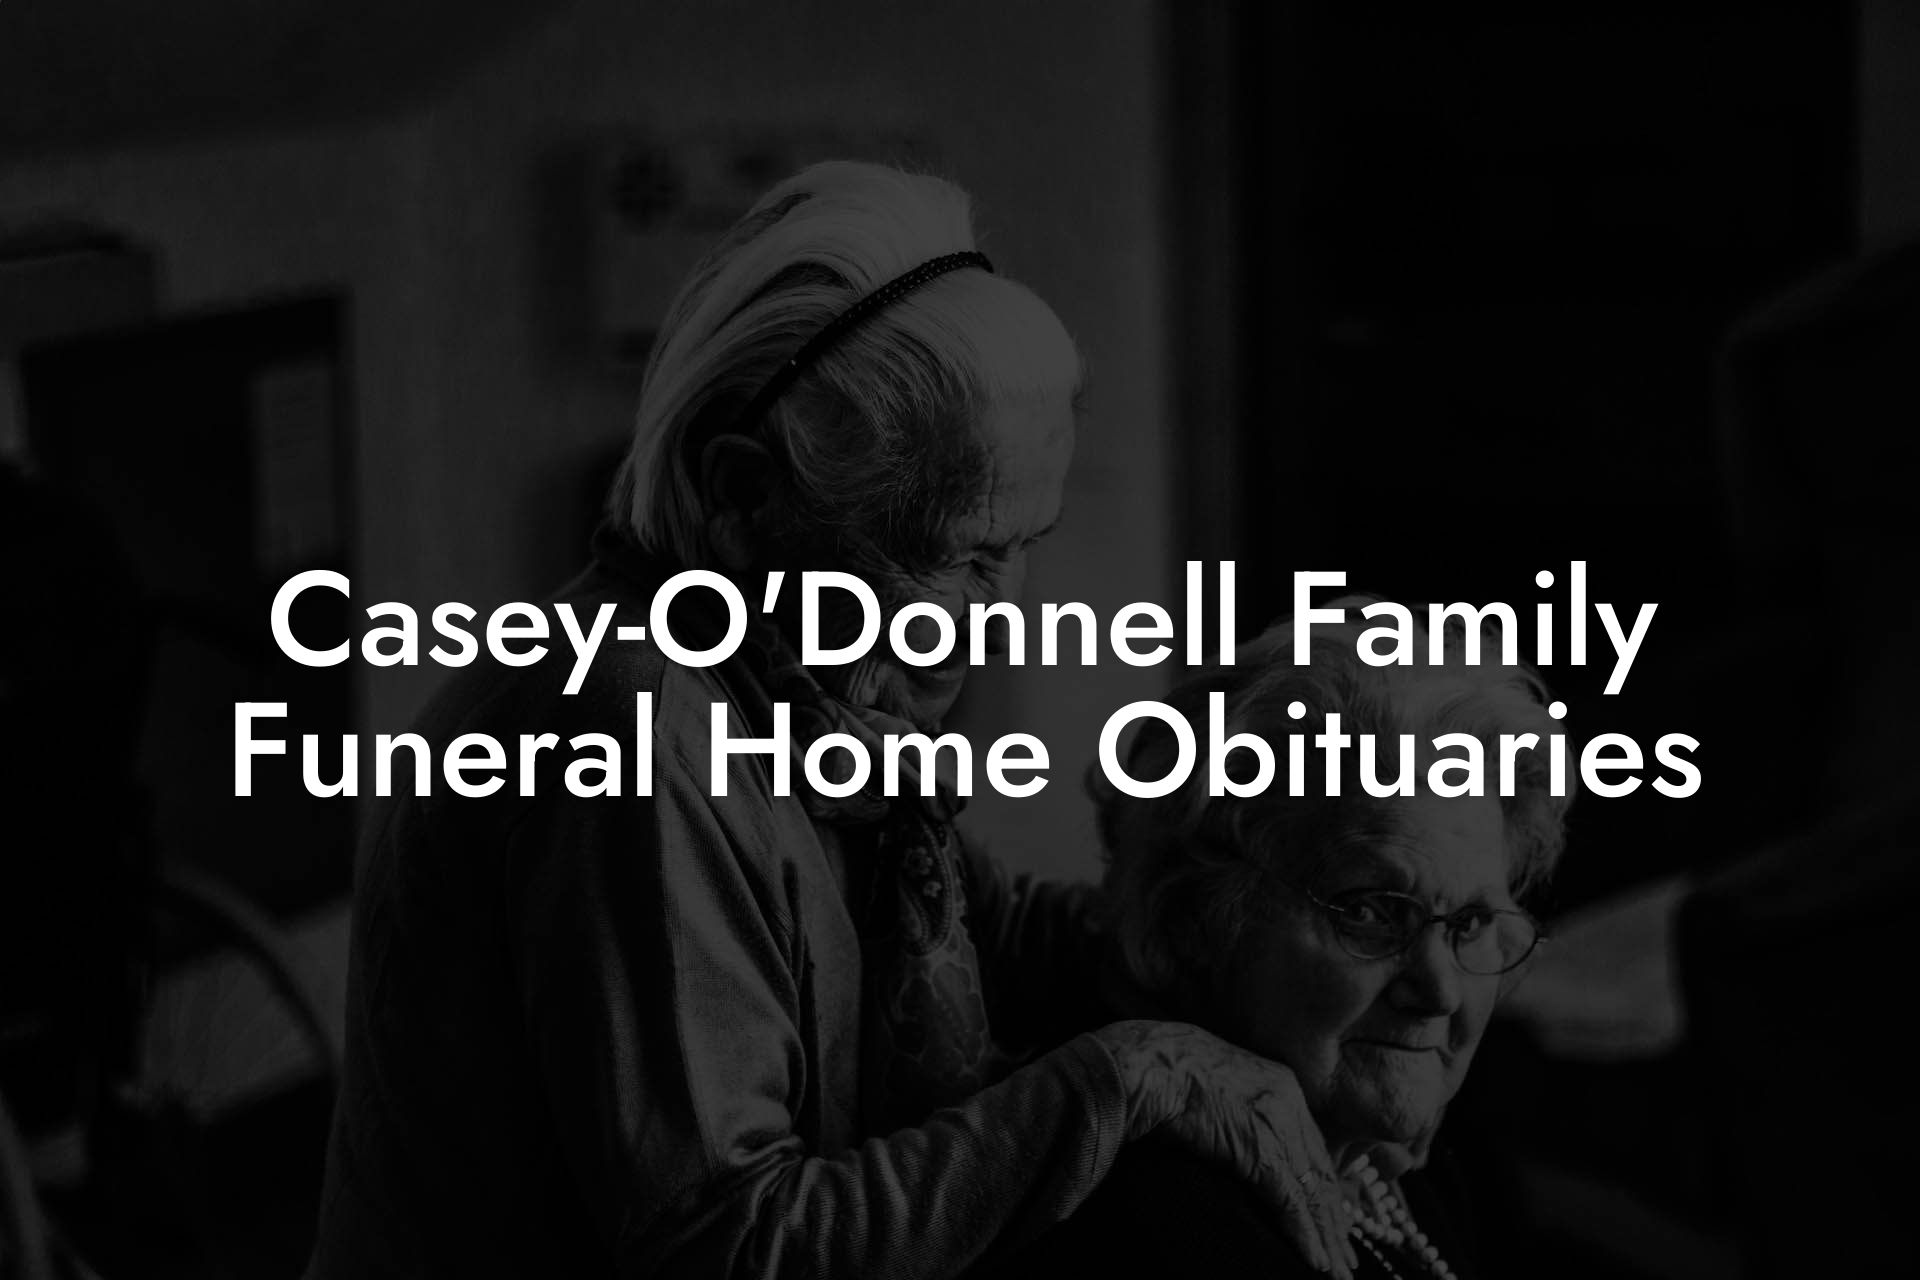 Casey-O'Donnell Family Funeral Home Obituaries